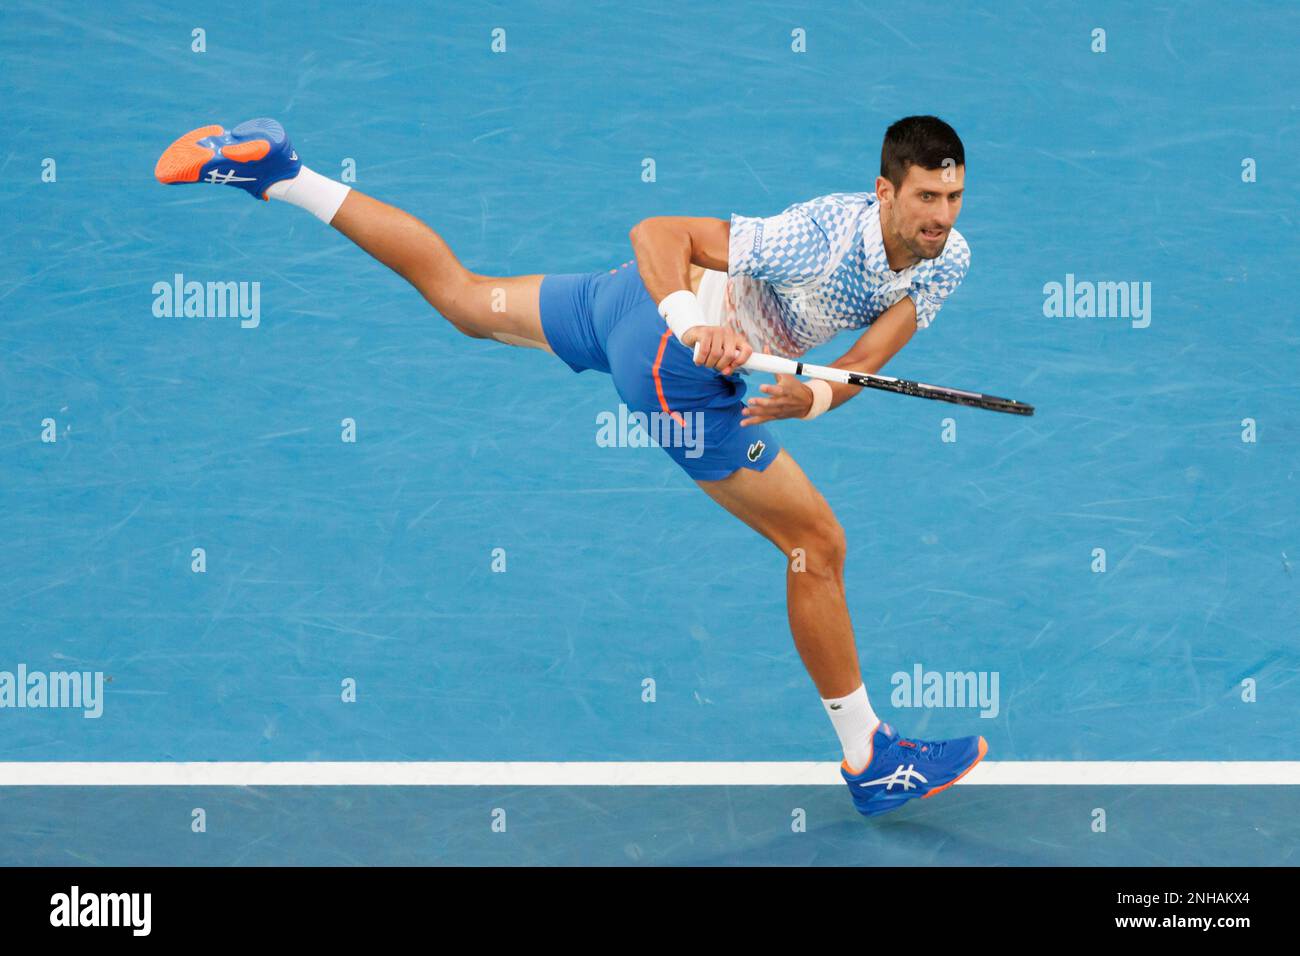 January 29, 2023: 4th seed NOVAK DJOKOVIC of Serbia in action against 3rd  seed STEFANOS TSITSIPAS of Greece on Rod Laver Arena in the Men's Singles  Final match on day 14 of